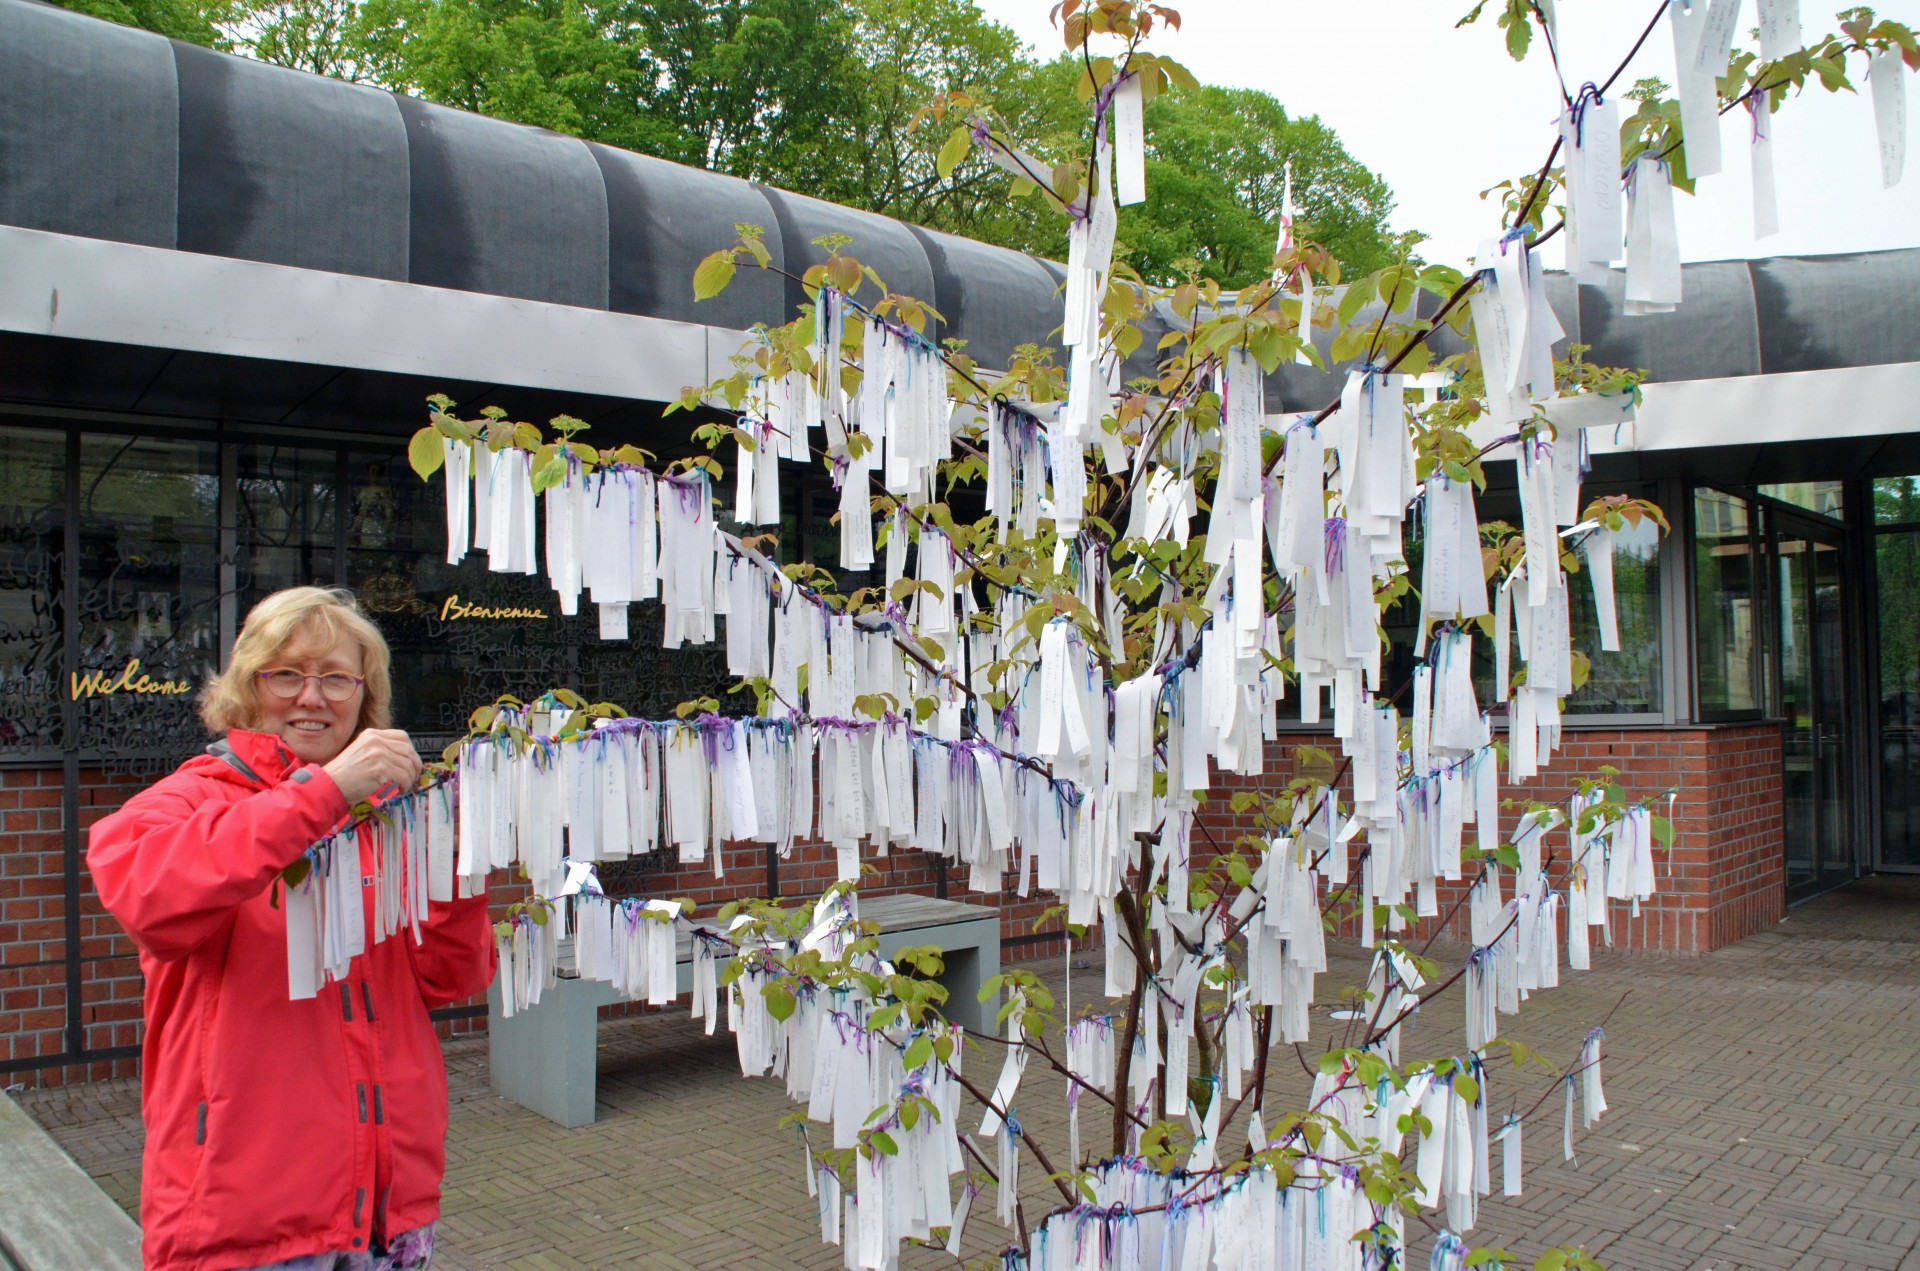 Tieing our message to the world peace tree